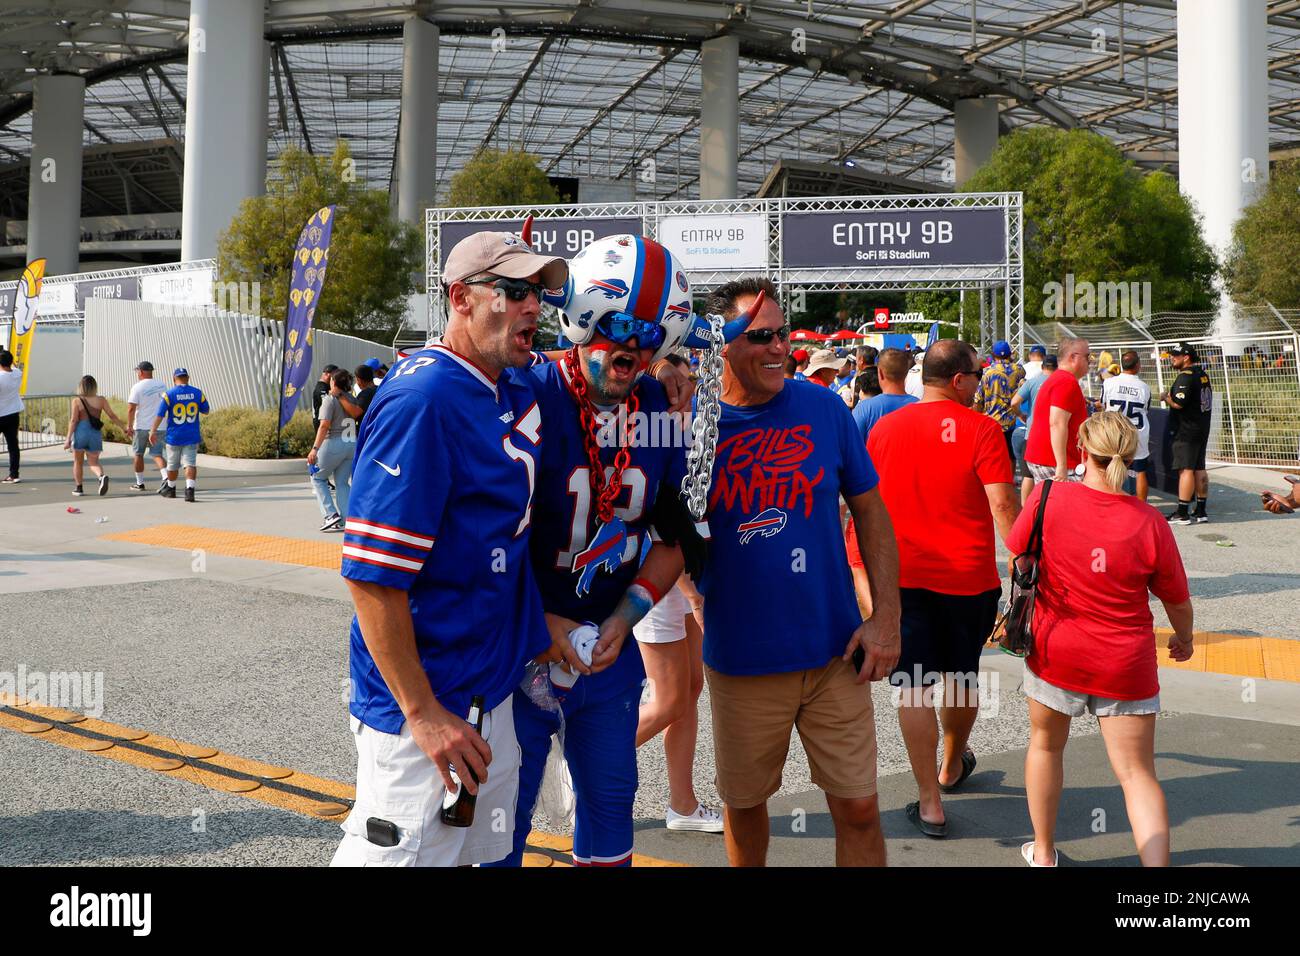 INGLEWOOD, CA - SEPTEMBER 08: Bills fans gather in front of the entry gates  prior to the NFL Opening Kickoff game between the Buffalo Bills and the Los  Angeles Rams on September